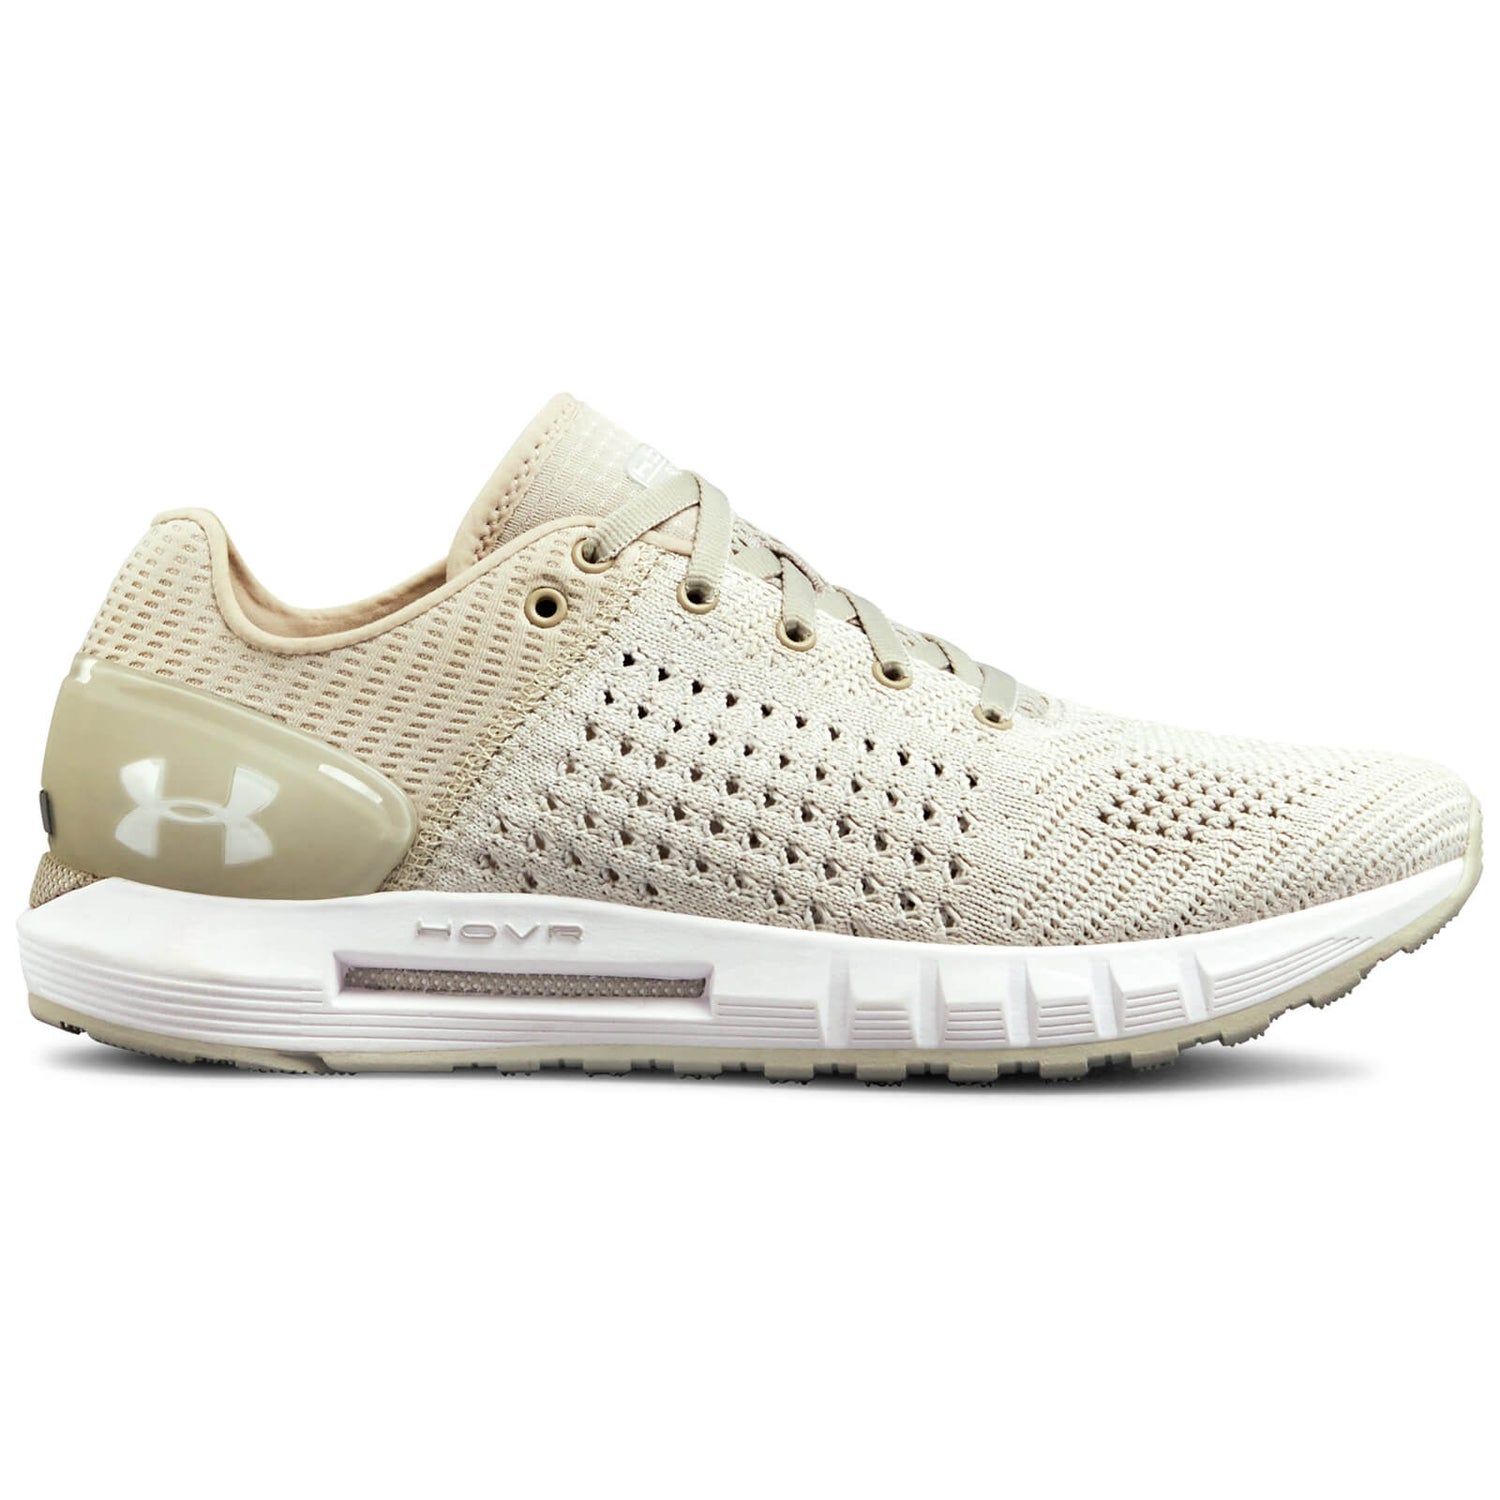 Under Armour Women's HOVR Sonic Running Shoes - White |